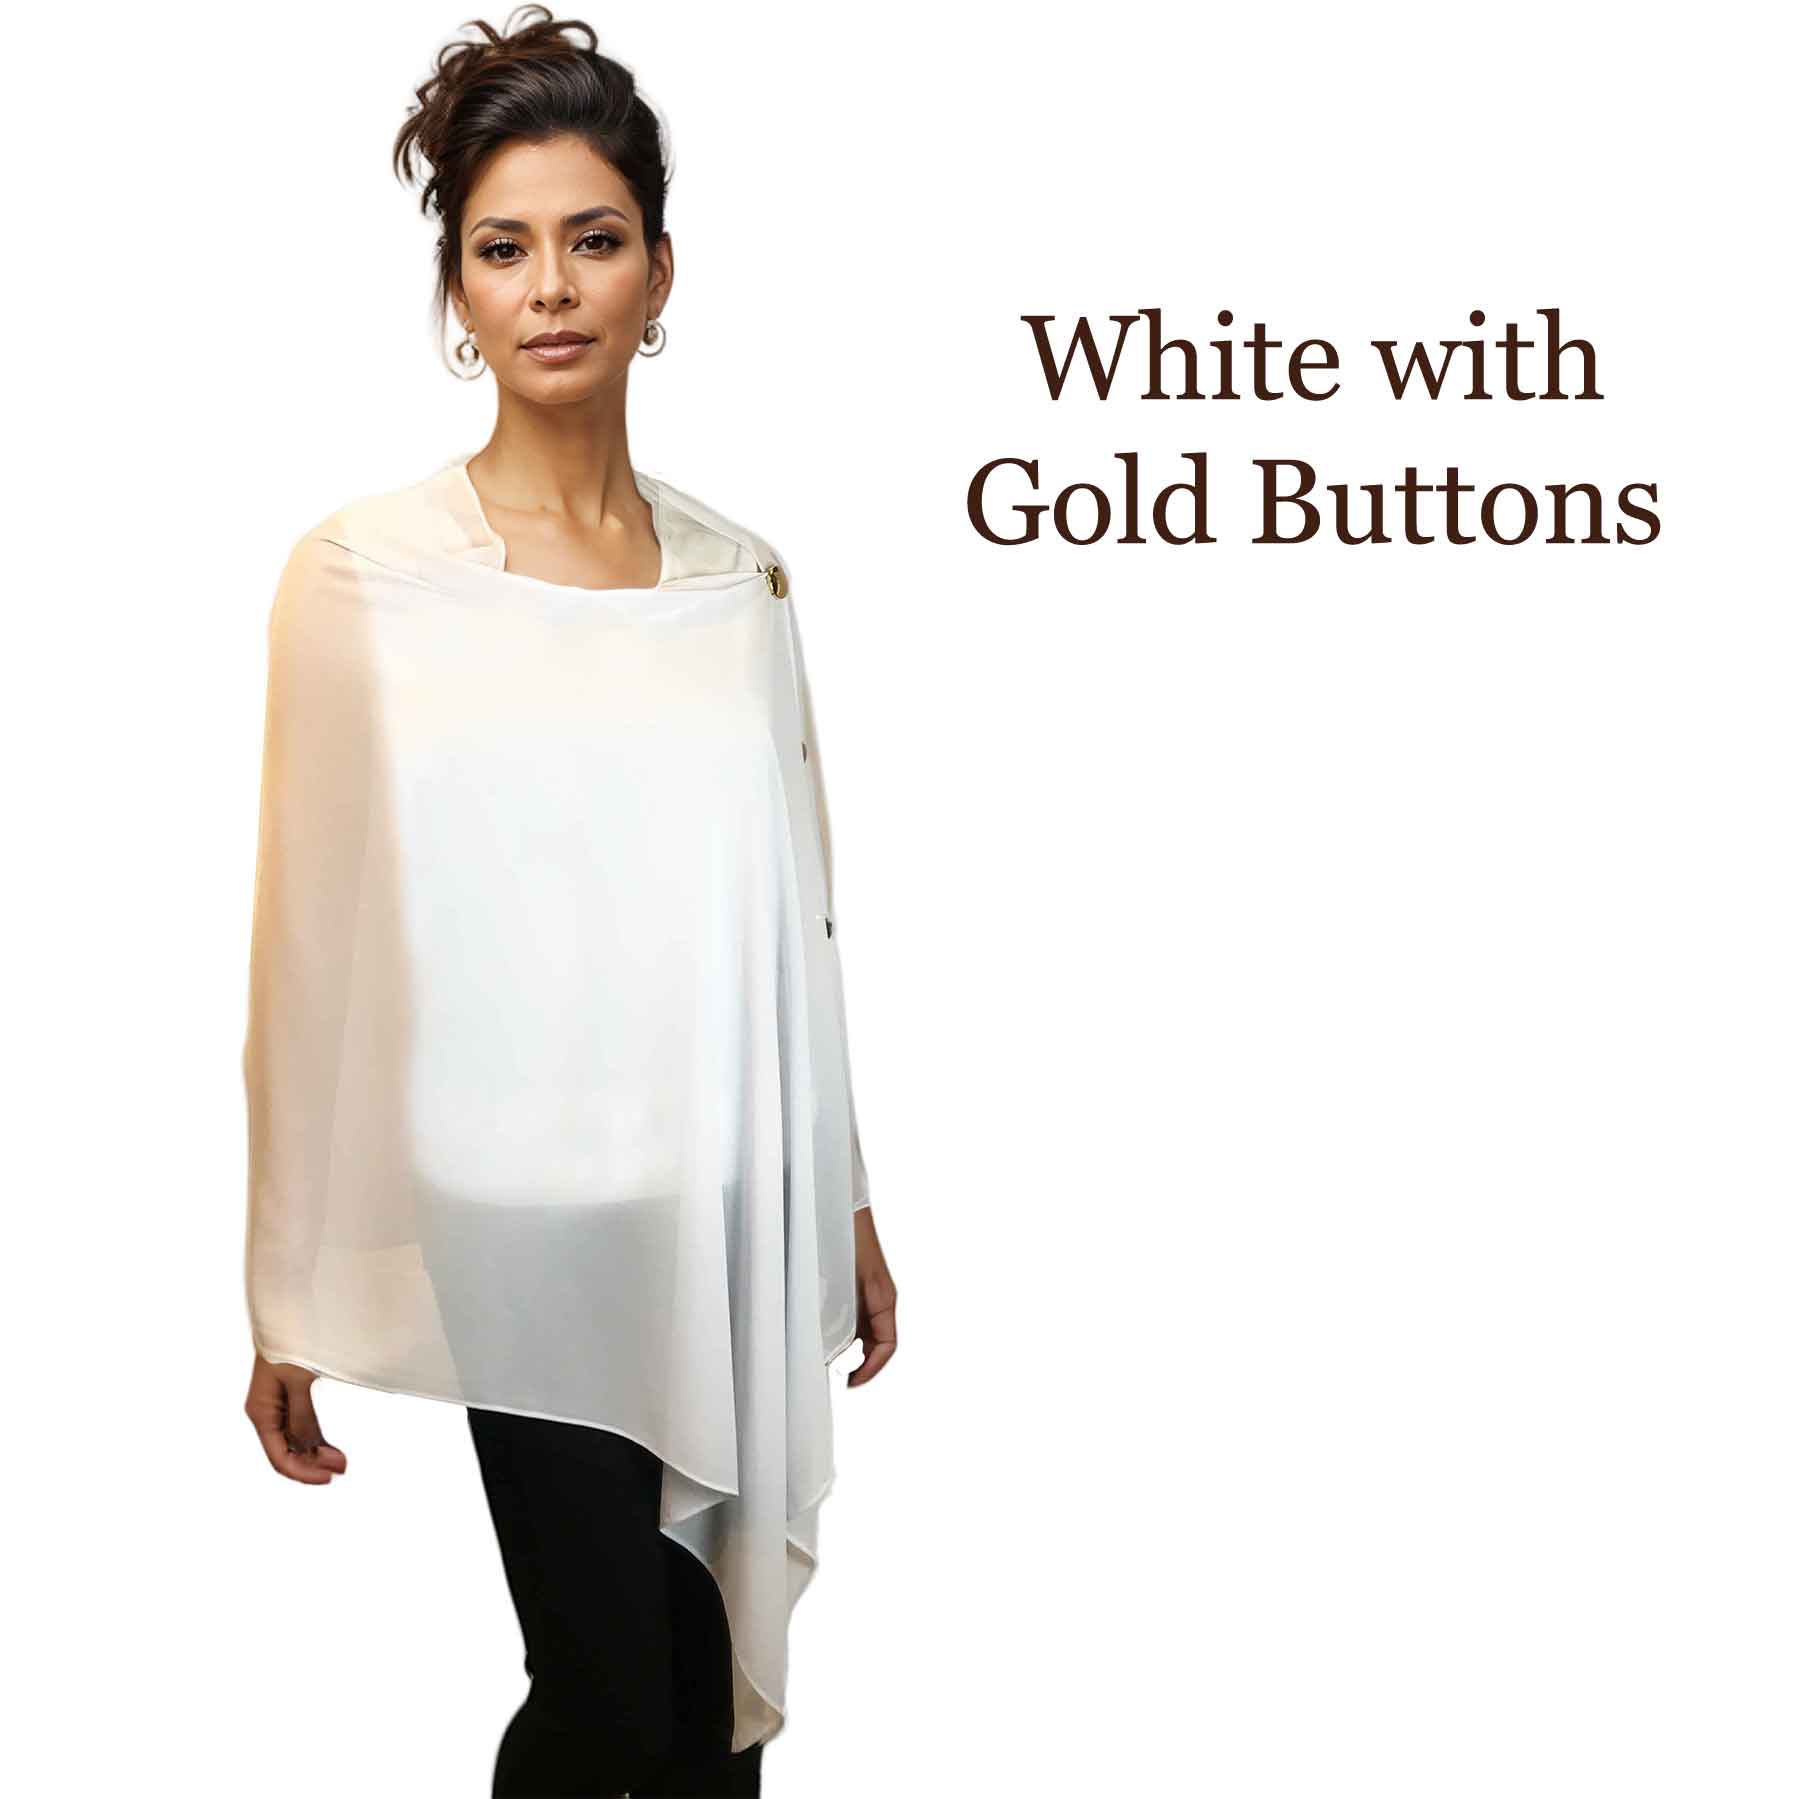 002G - White w/Gold Buttons<br>
Georgette Button Shawl

